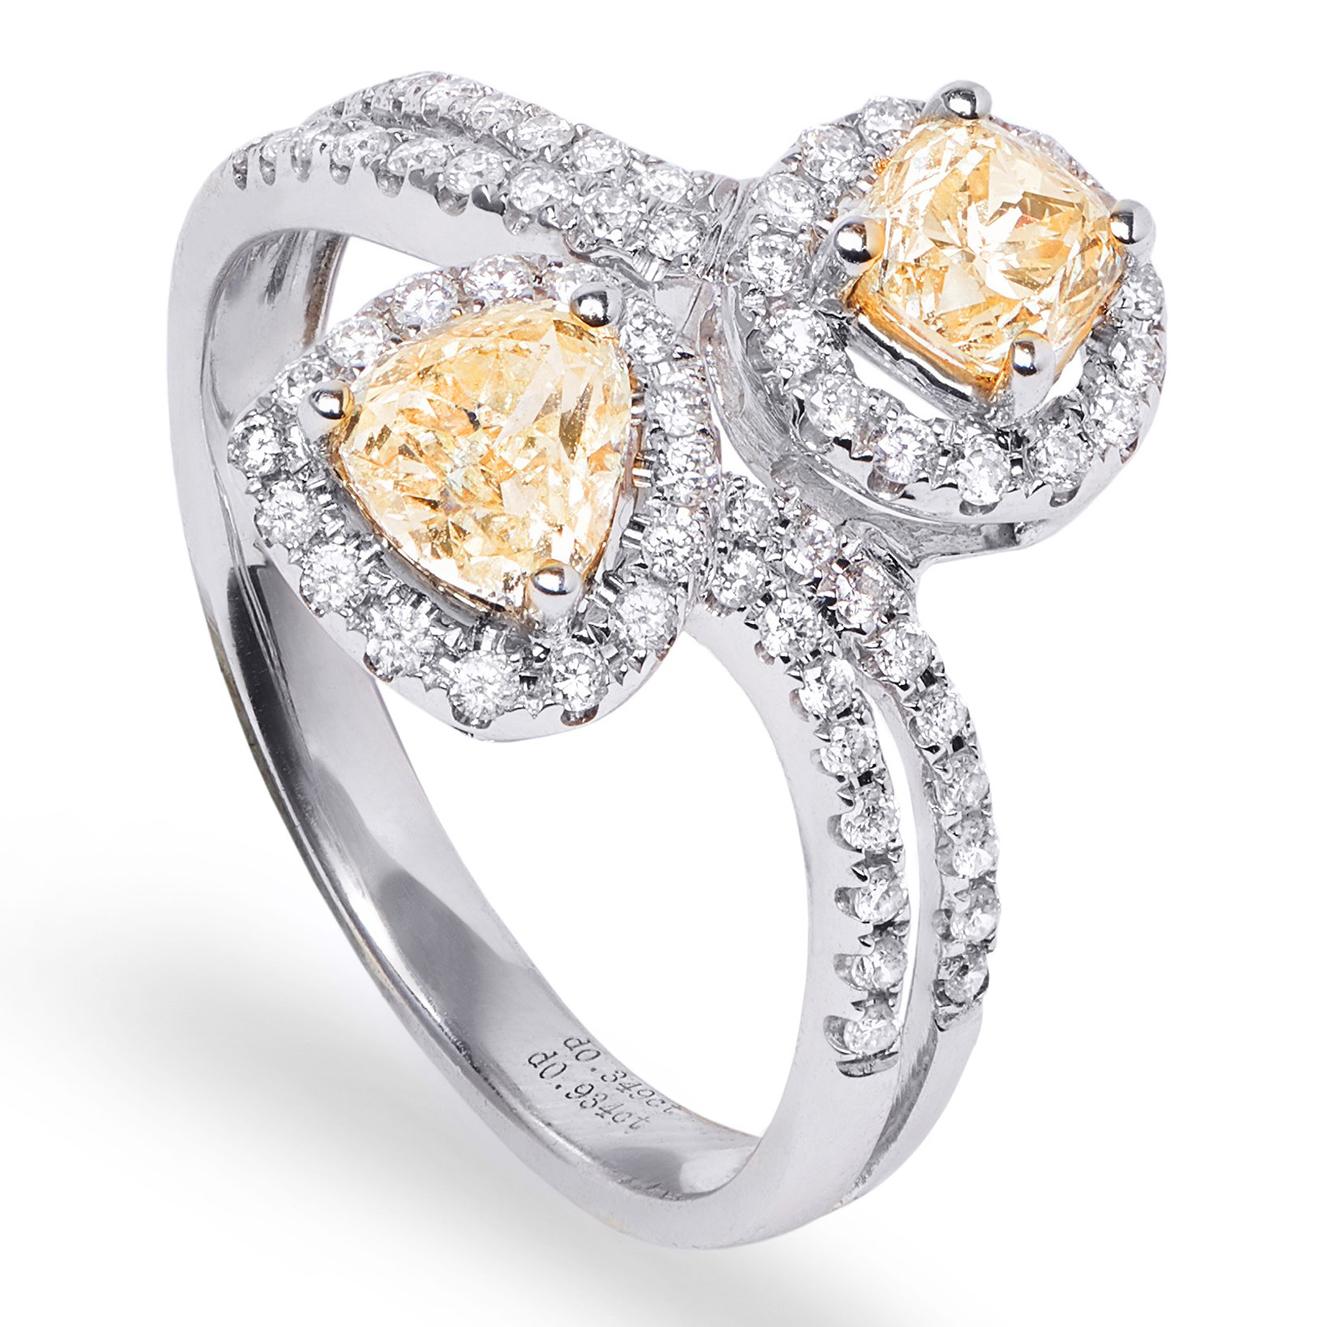 The 'Toi et Moi' Fancy Yellow Diamond Ring is a classic  re-imagined in 18k White Gold with 18k Yellow Gold and 65 White Diamonds accents around two beautiful Canary Diamond centre-stones. 
Also makes a very modern and unique engagement ring.

Ring